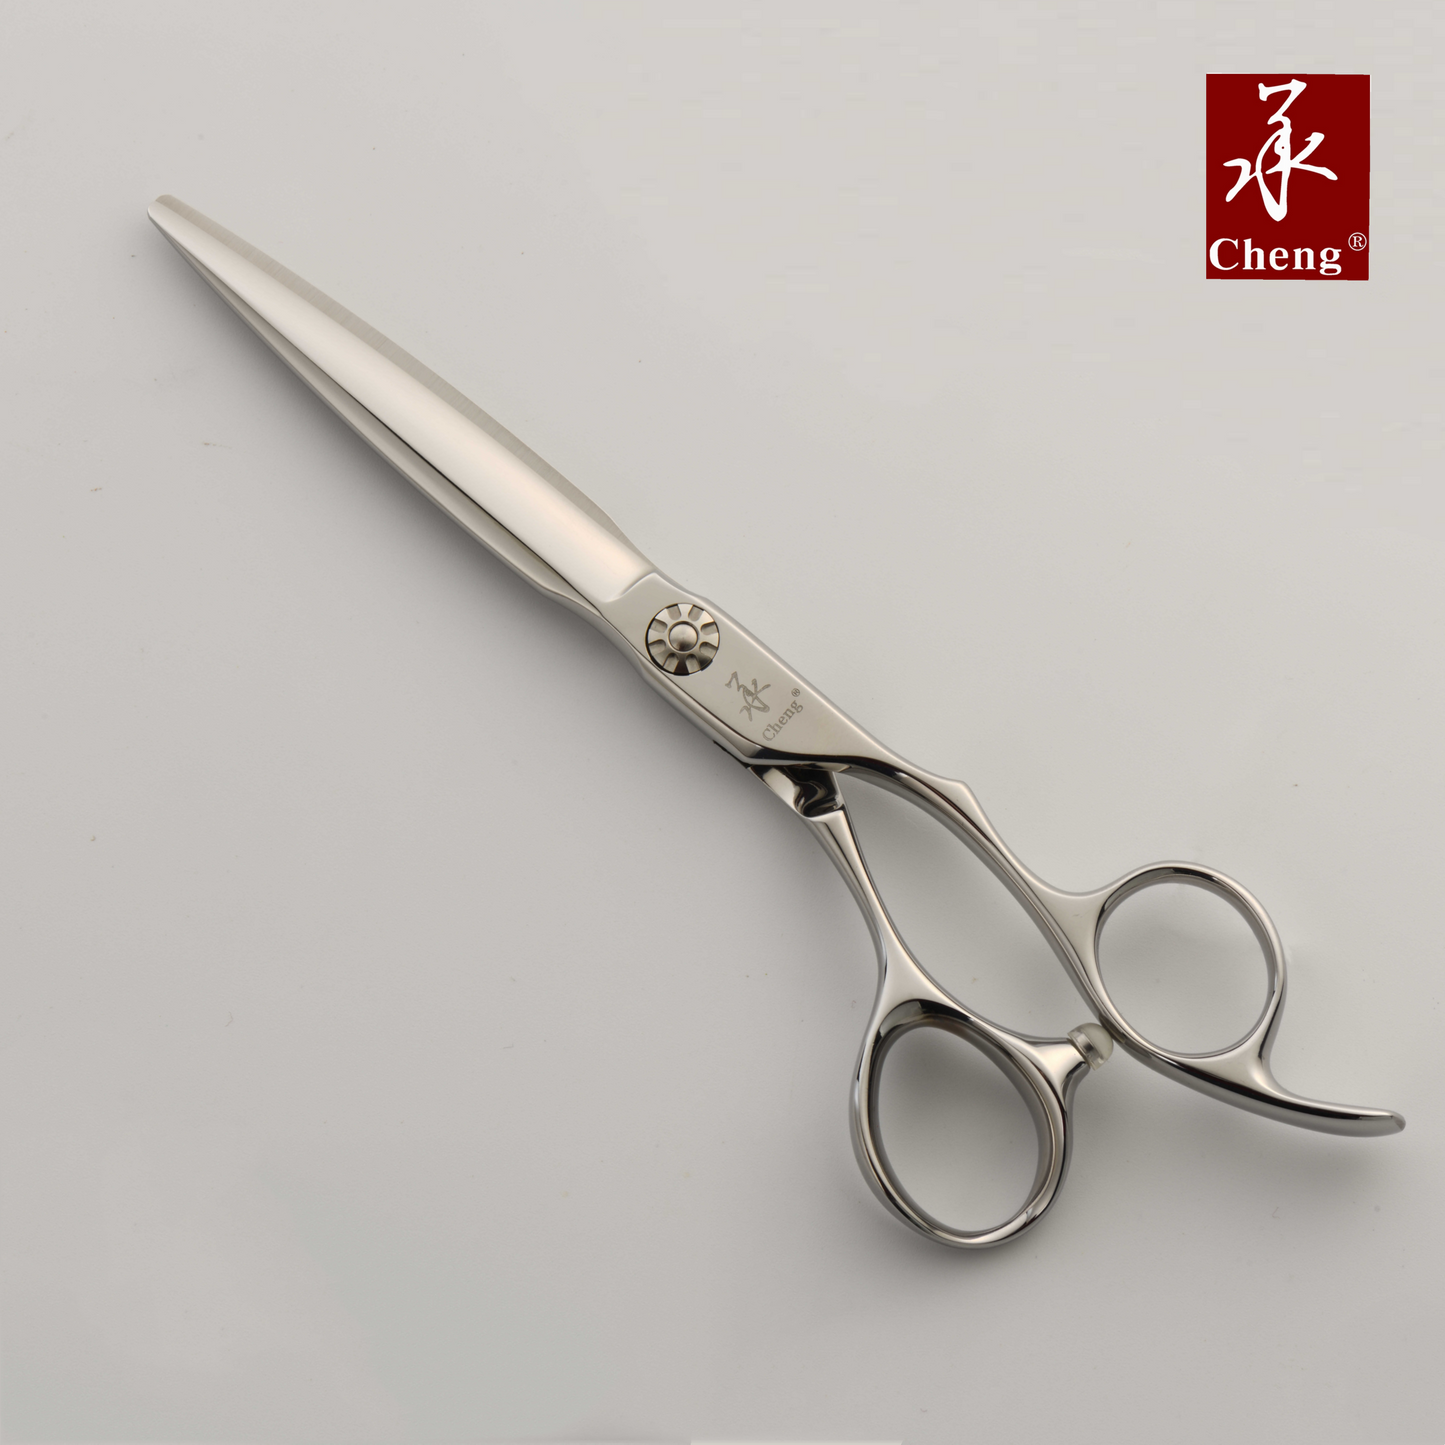 UC-627C Hair Thinning Scissors Professional Salon Barber Shear About=20%